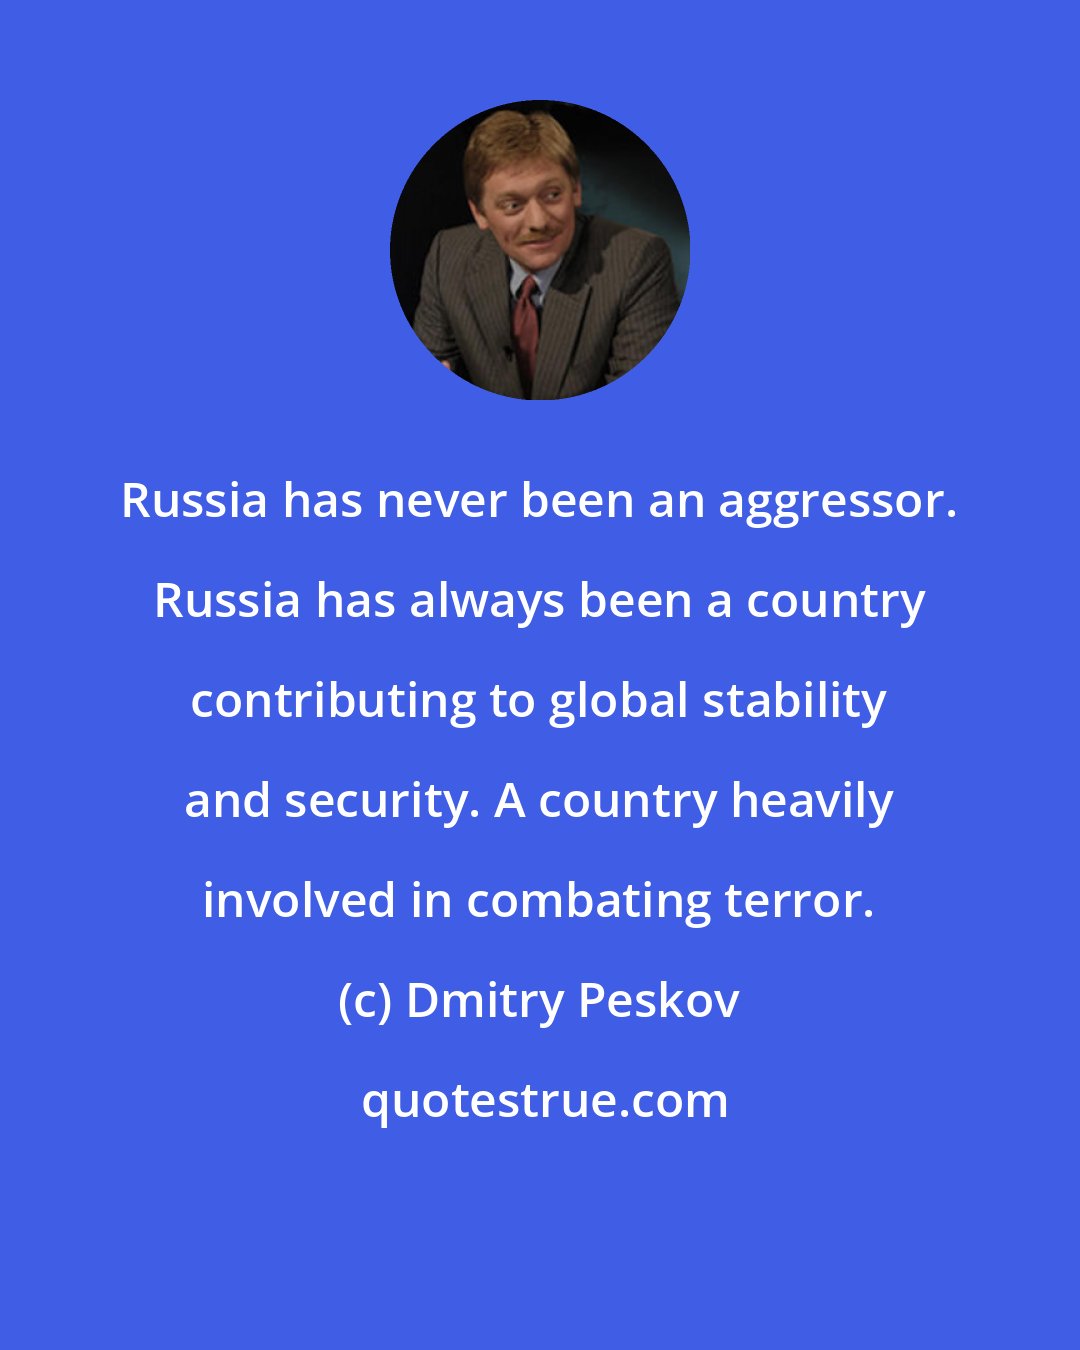 Dmitry Peskov: Russia has never been an aggressor. Russia has always been a country contributing to global stability and security. A country heavily involved in combating terror.